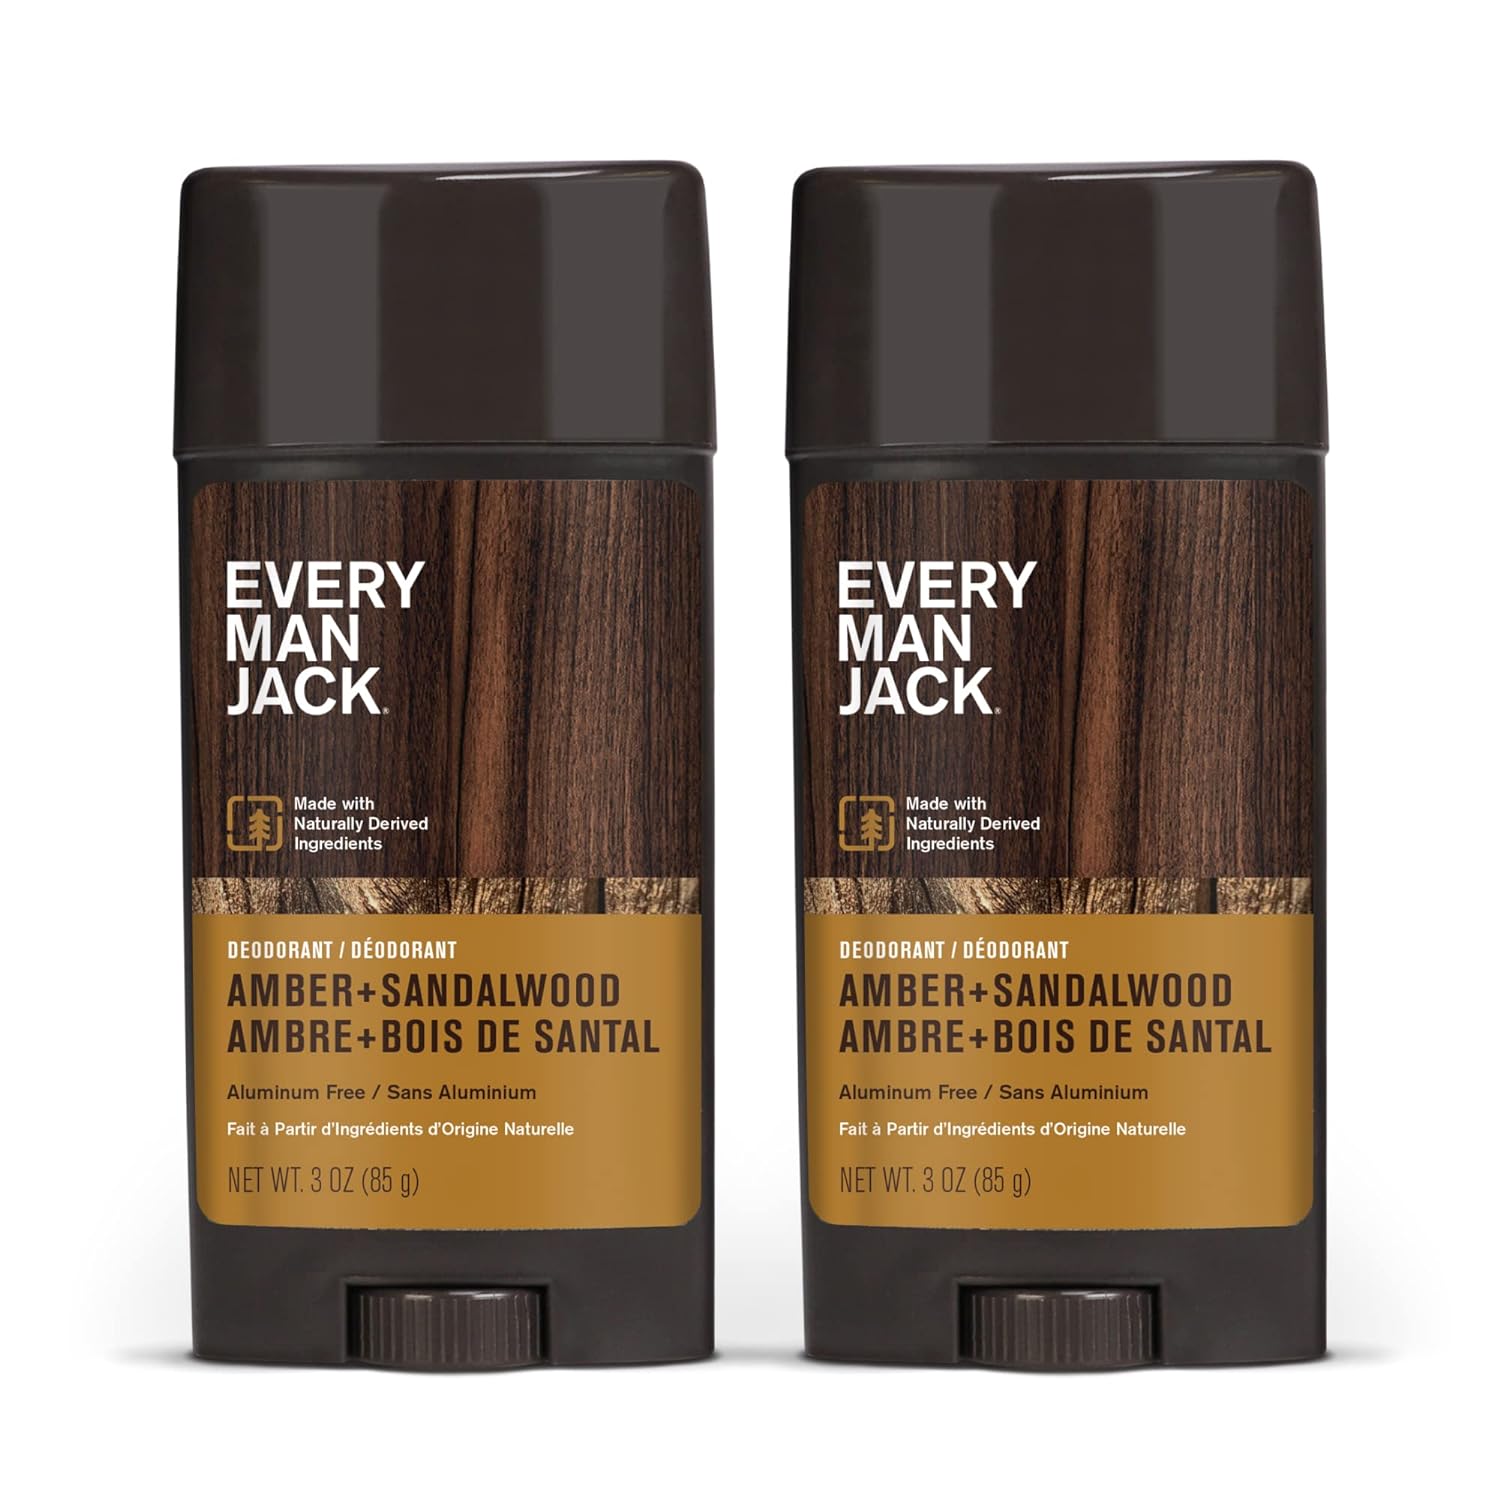 Every Man Jack Amber + Sandalwood Mens Deodorant - Stay Fresh with Aluminum Free Deodorant For all S